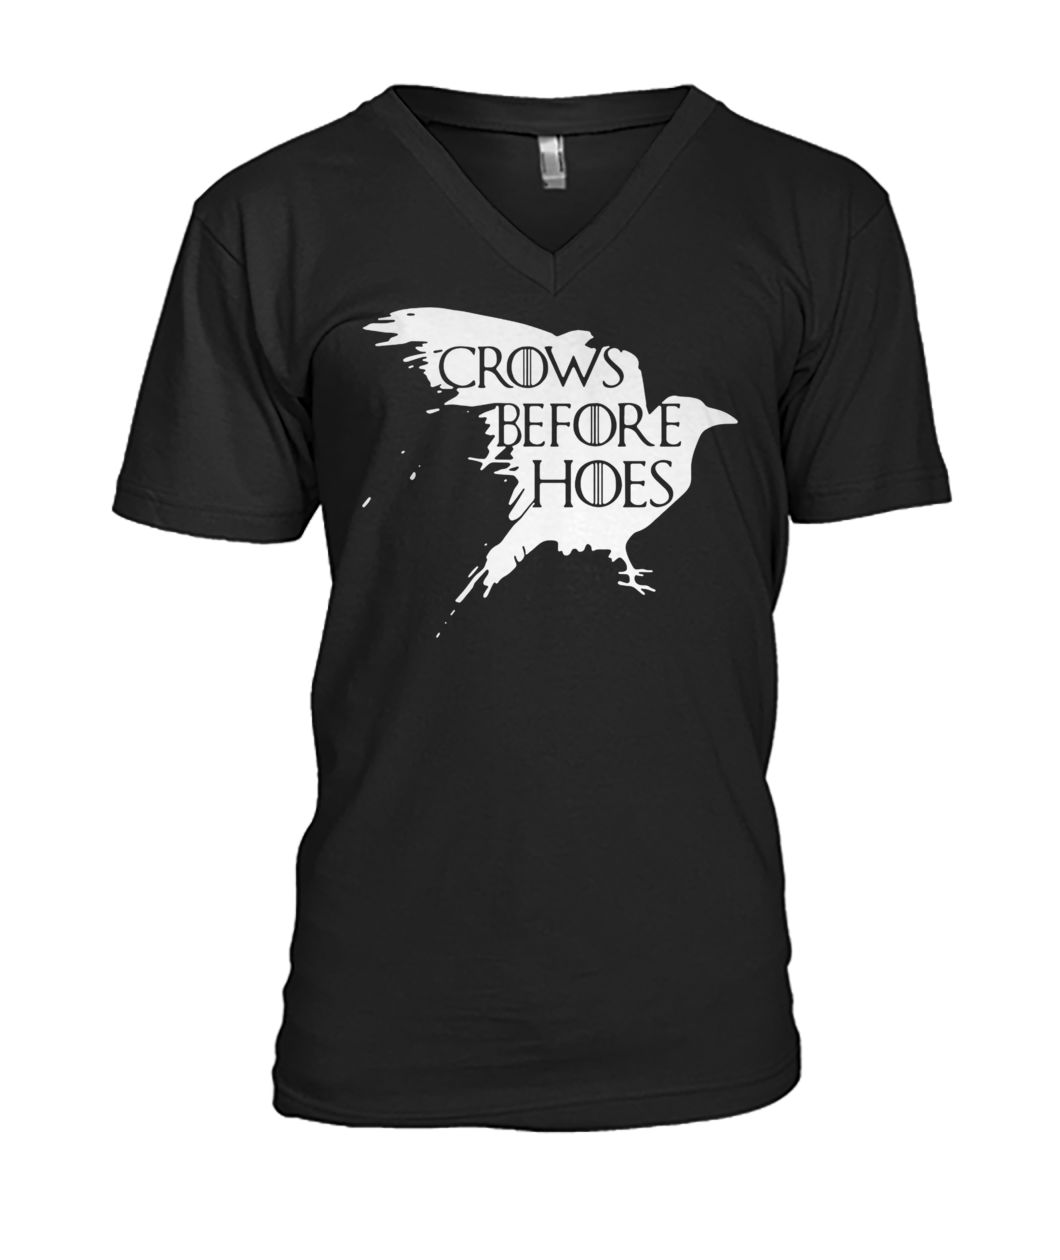 Game of thrones crows before hoes mens v-neck